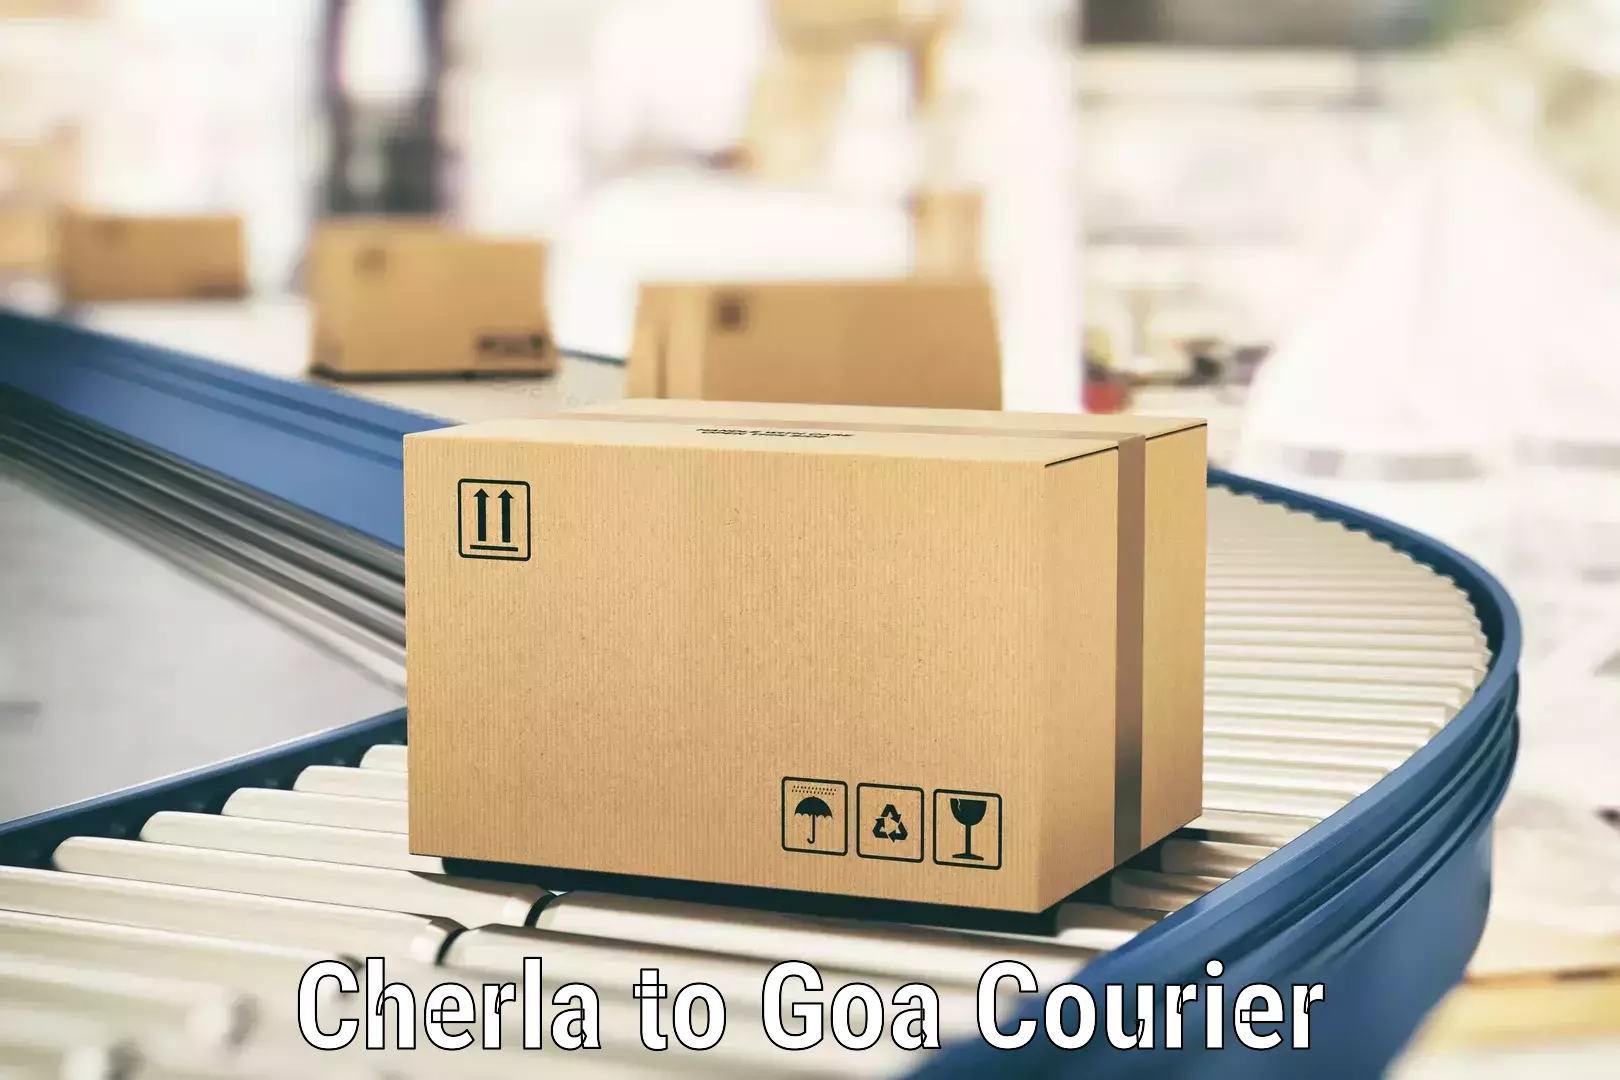 State-of-the-art courier technology in Cherla to Goa